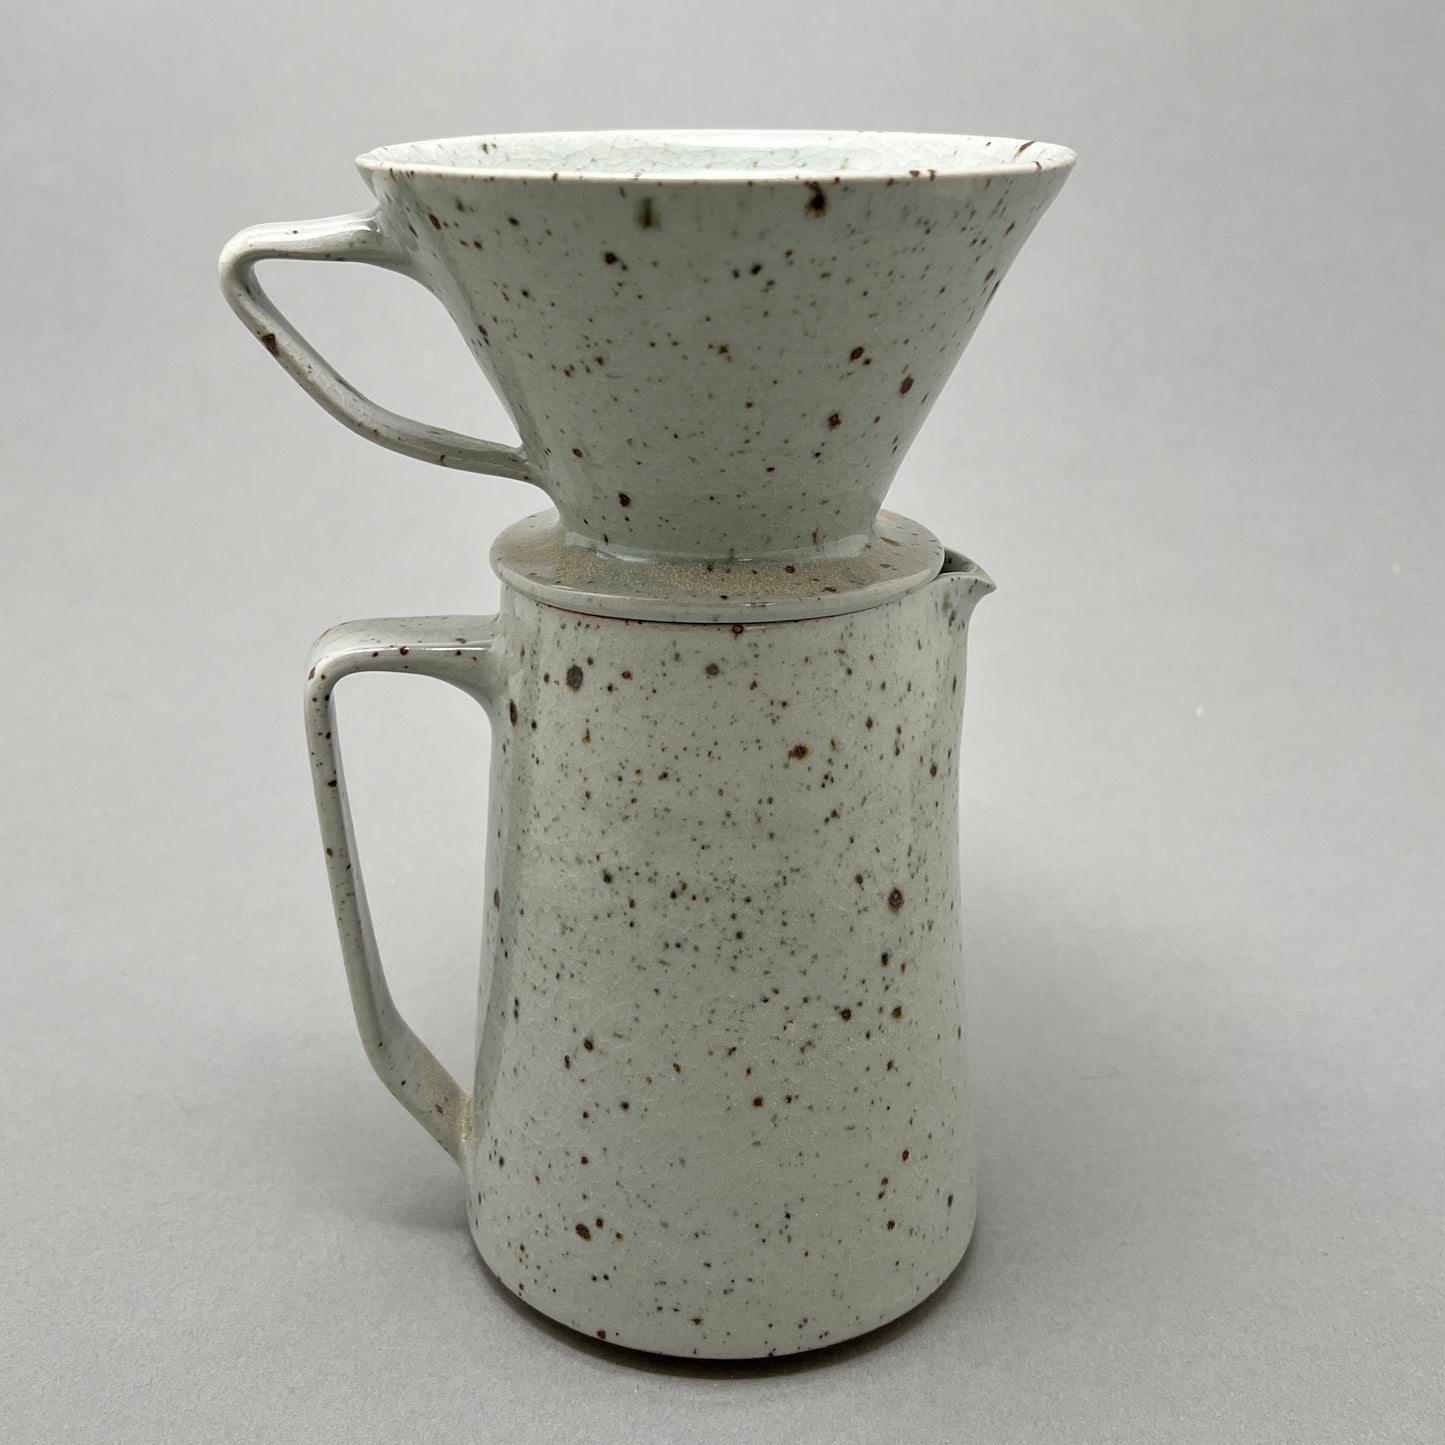 A light grey ceramic coffee pitcher standing on a gray background